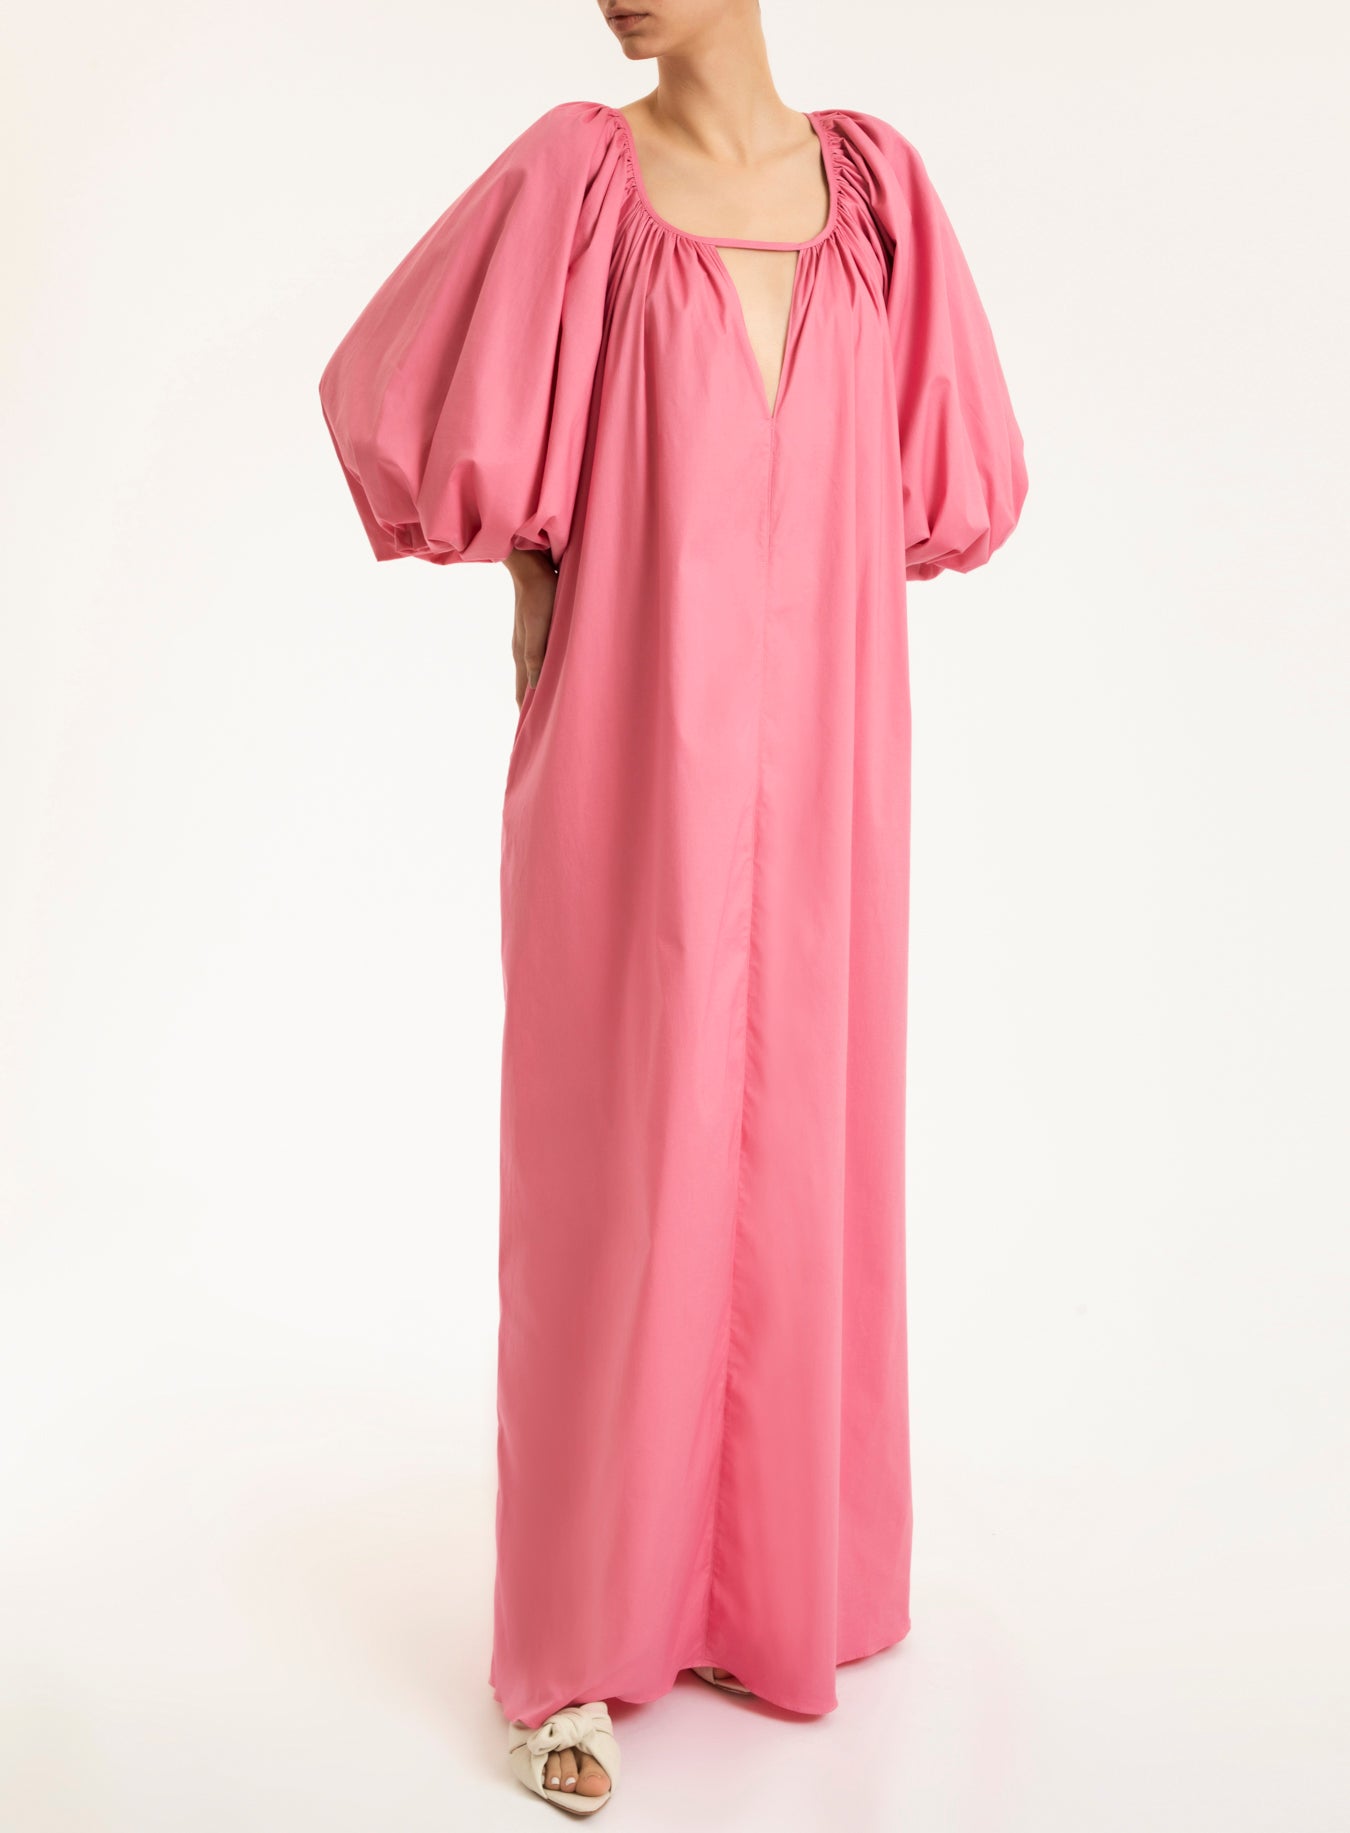 Effortless Chic Pink Puff-Sleeved Long Dress Front 2